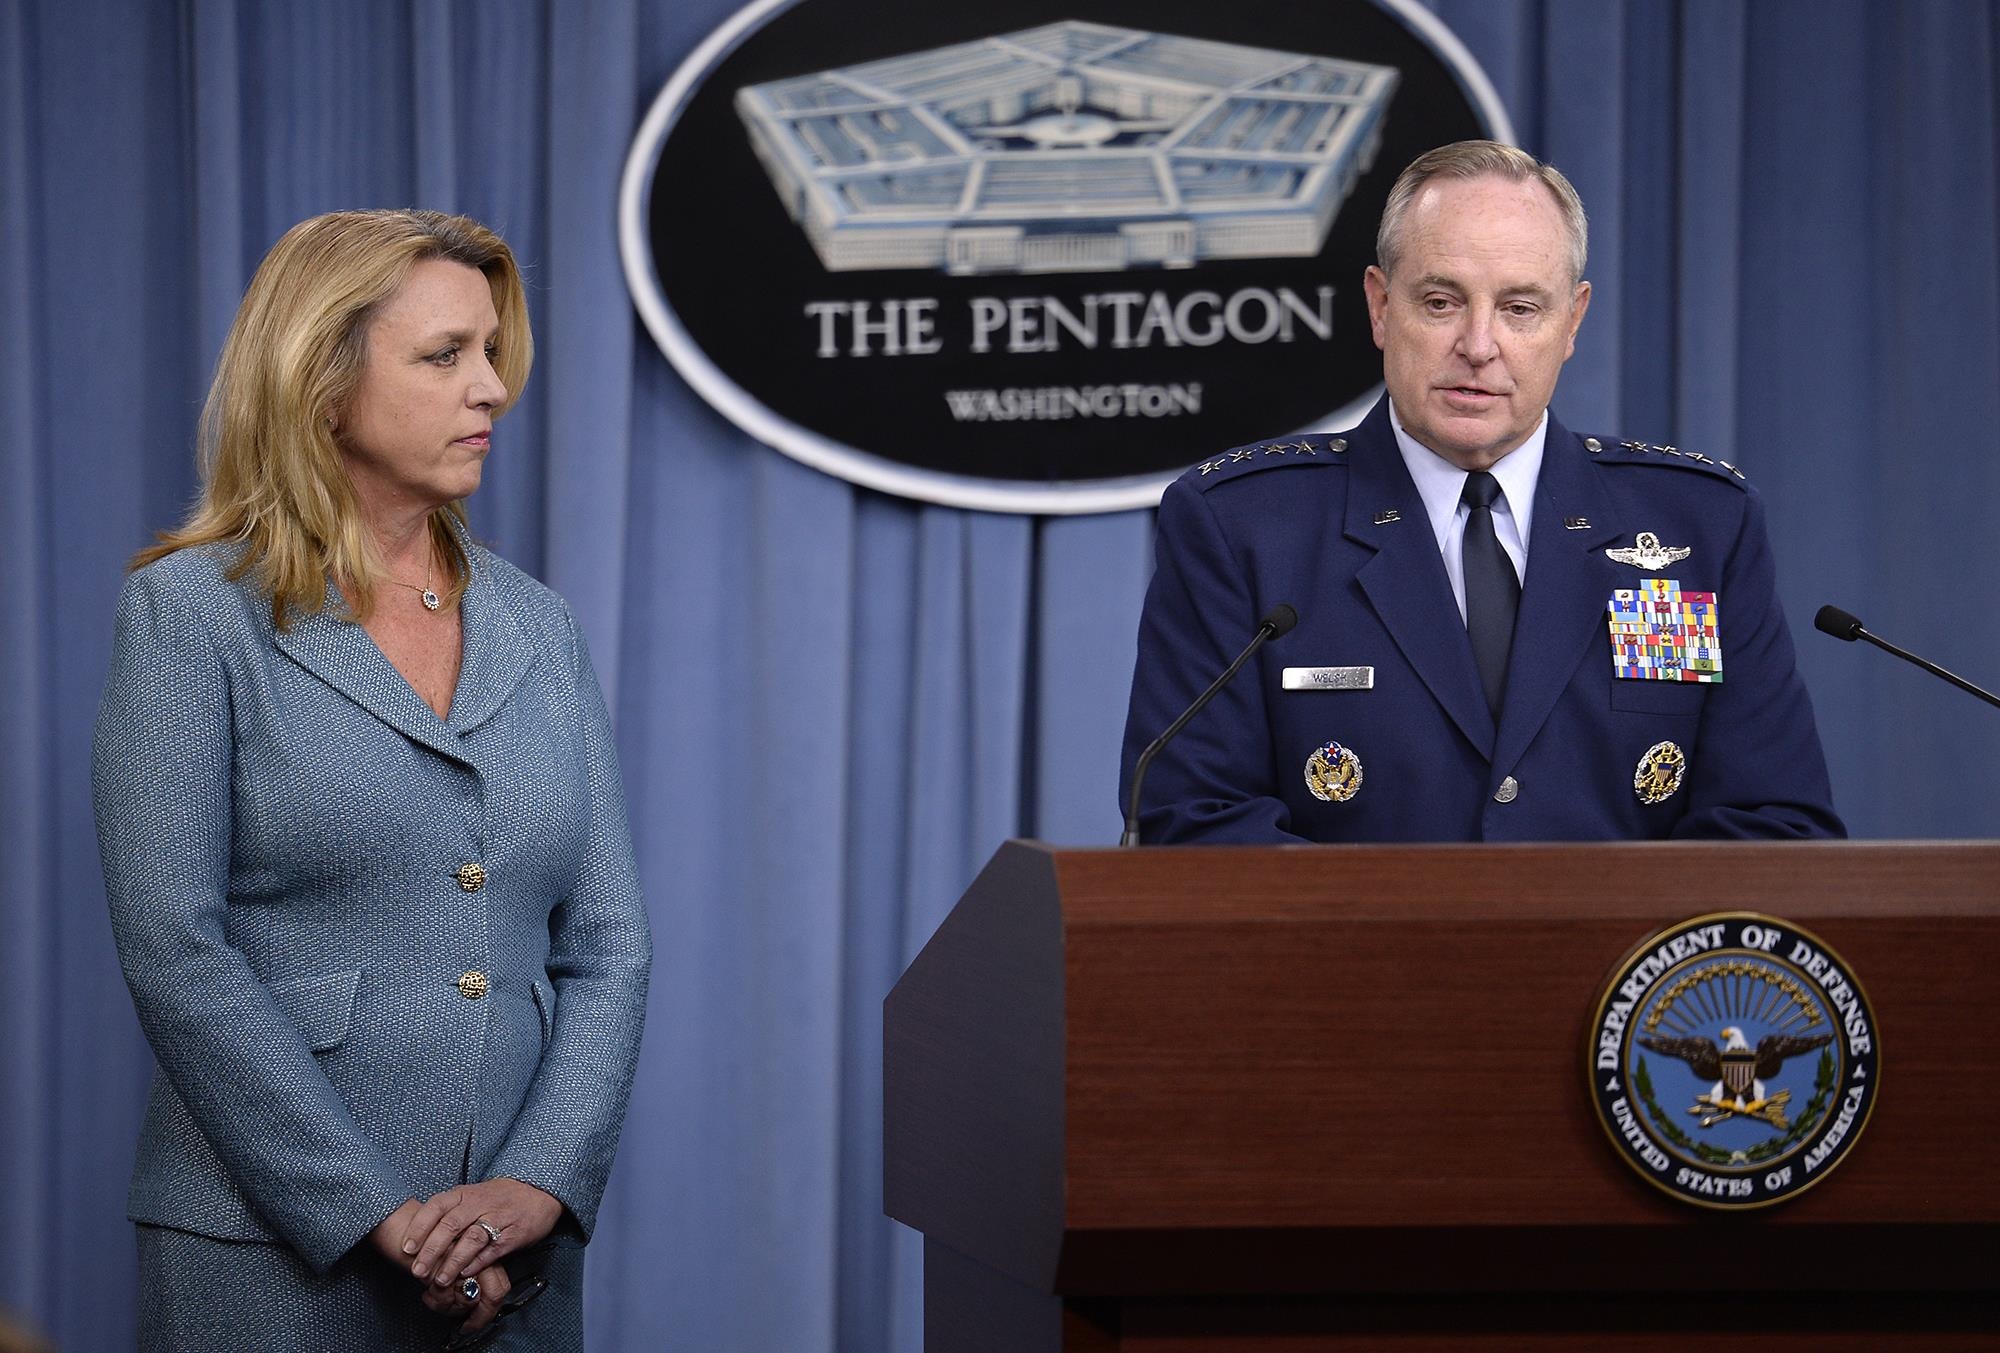 Air Force Chief of Staff Gen. Mark A. Welsh III delivers his statement with Secretary of the Air Force Deborah Lee James during a press briefing to announce he award of the long range strike bomber contract in the Pentagon, Oct. 27, 2015.  During his comments, Welsh stated that the LRS-B will provide our nation tremendous flexibility as a duel-capable bomber and the strategic agility to respond and adapt faster than out potential adversaries.  (U.S. Air Force photo/Scott M. Ash)